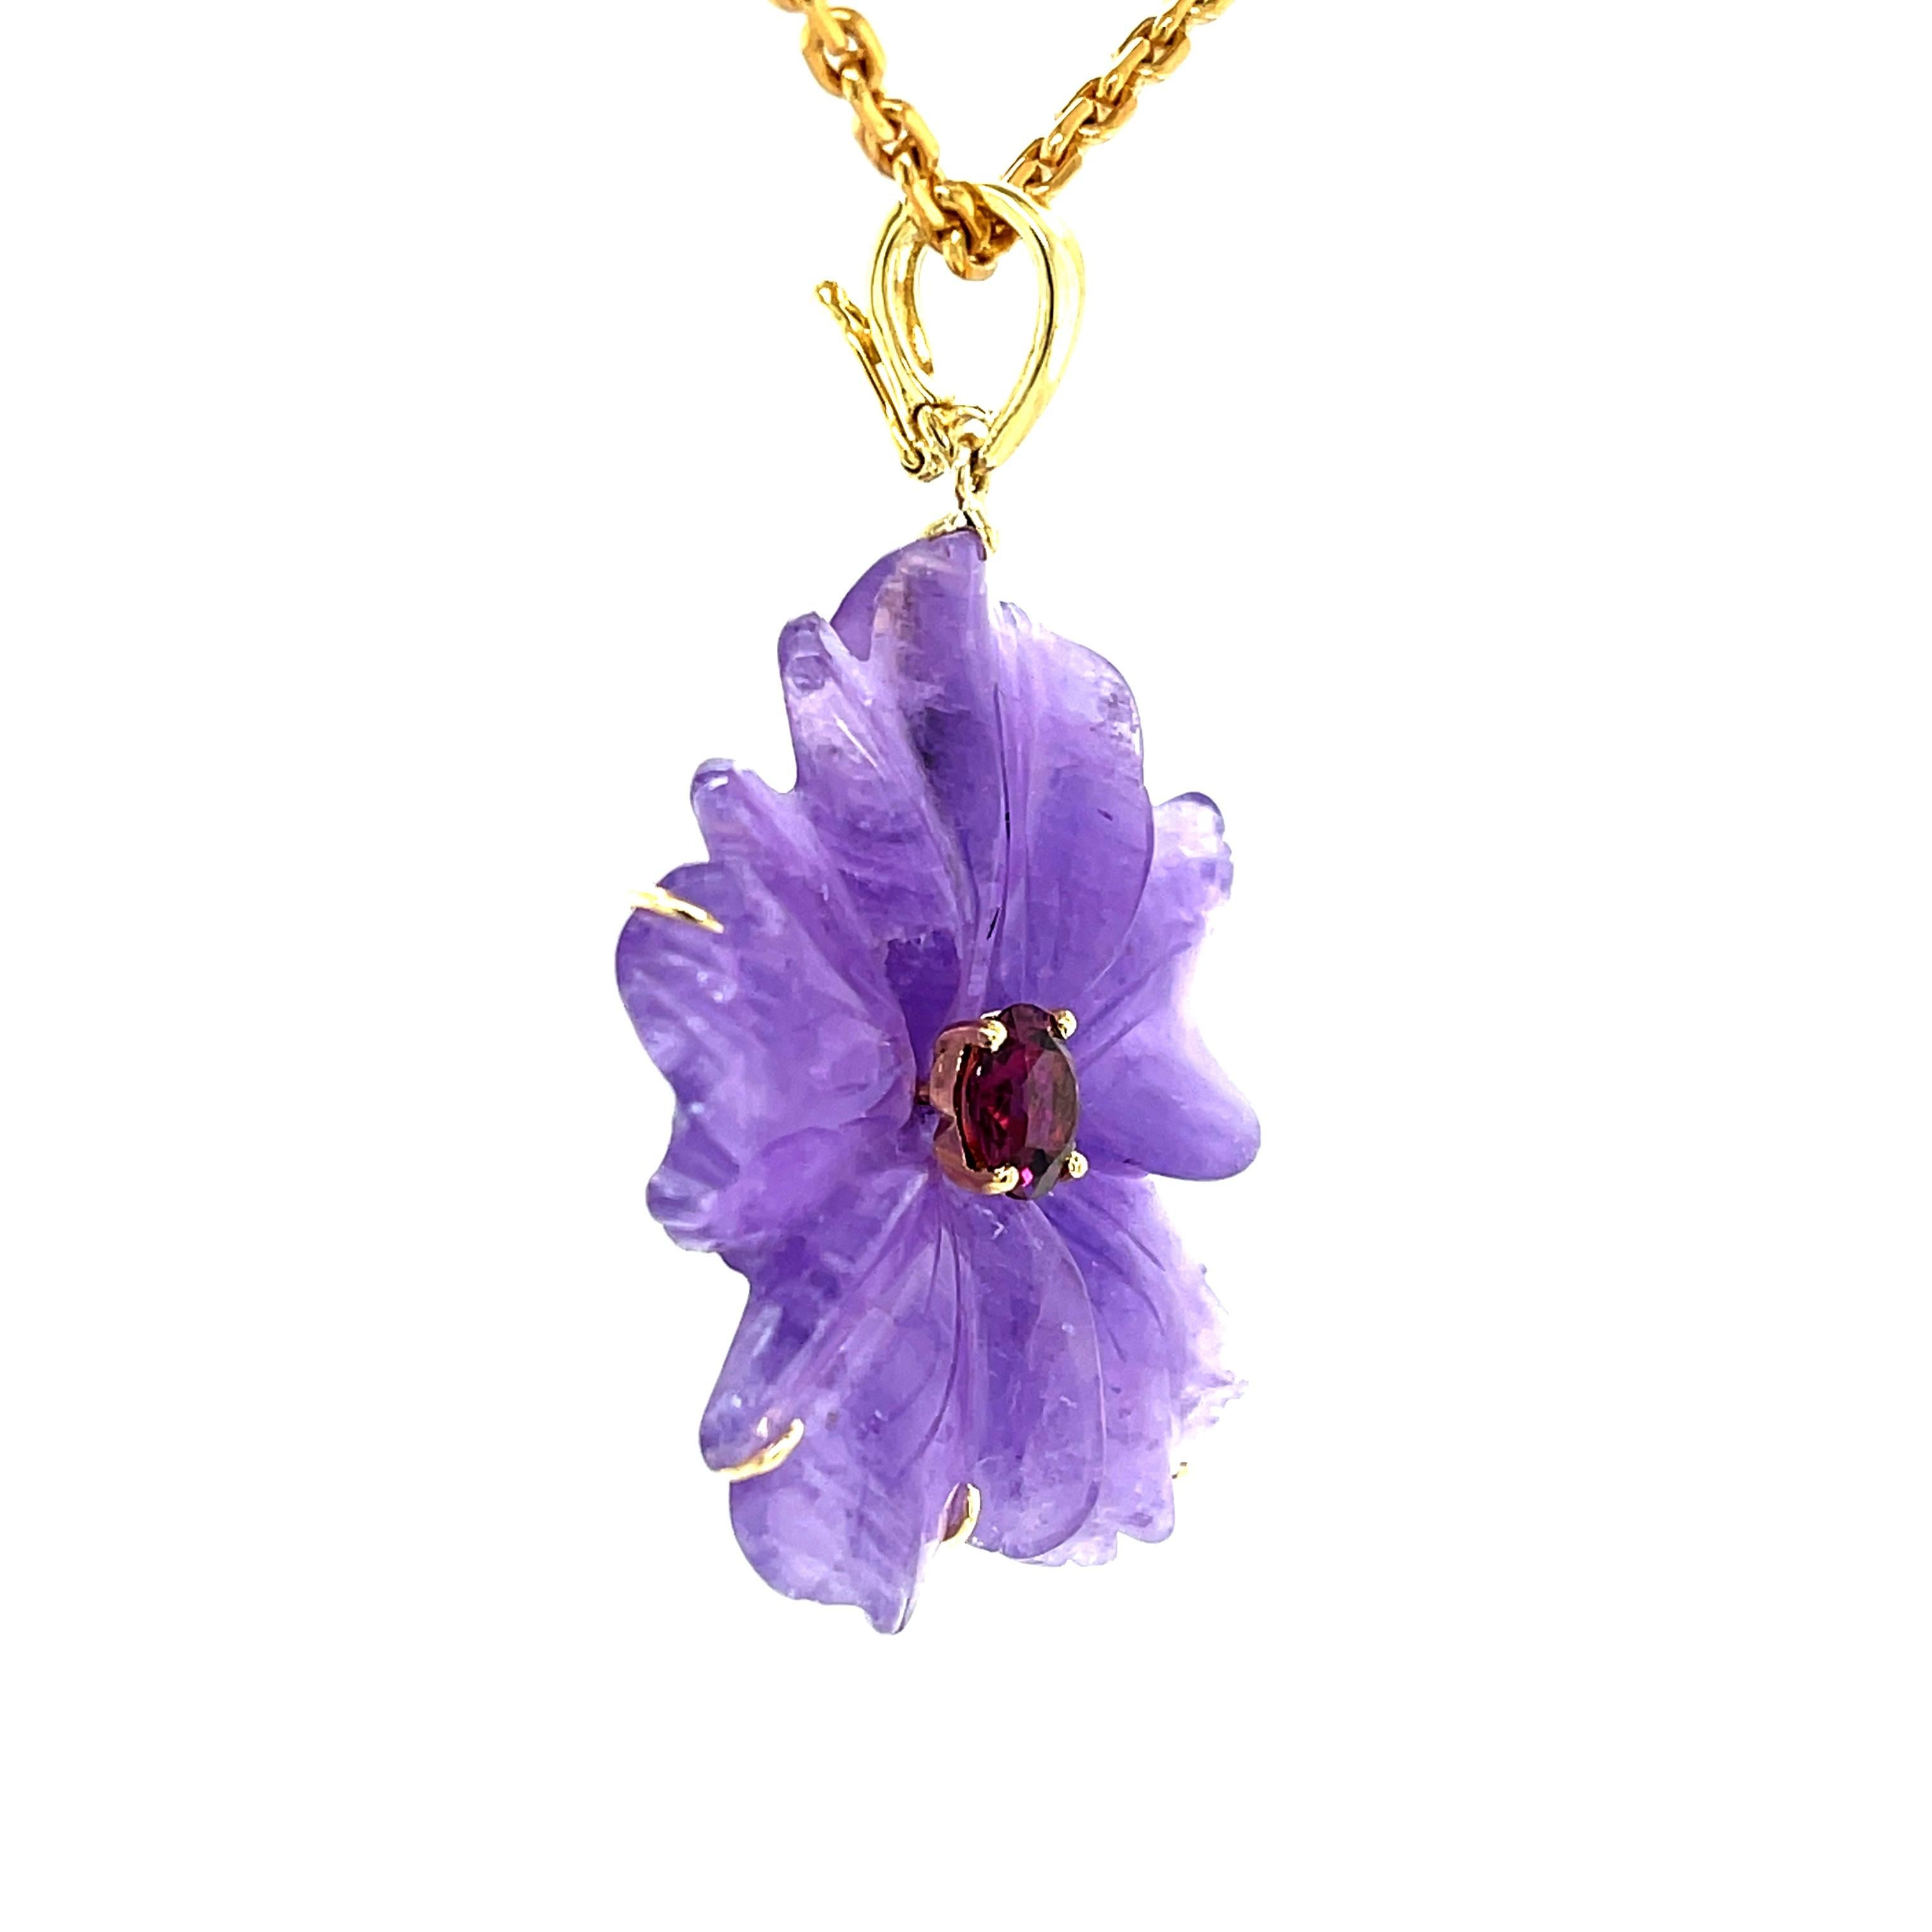 Mixed Cut Hand Carved Amethyst Flower & Rhodolite Garnet Pendant Necklace in Yellow Gold